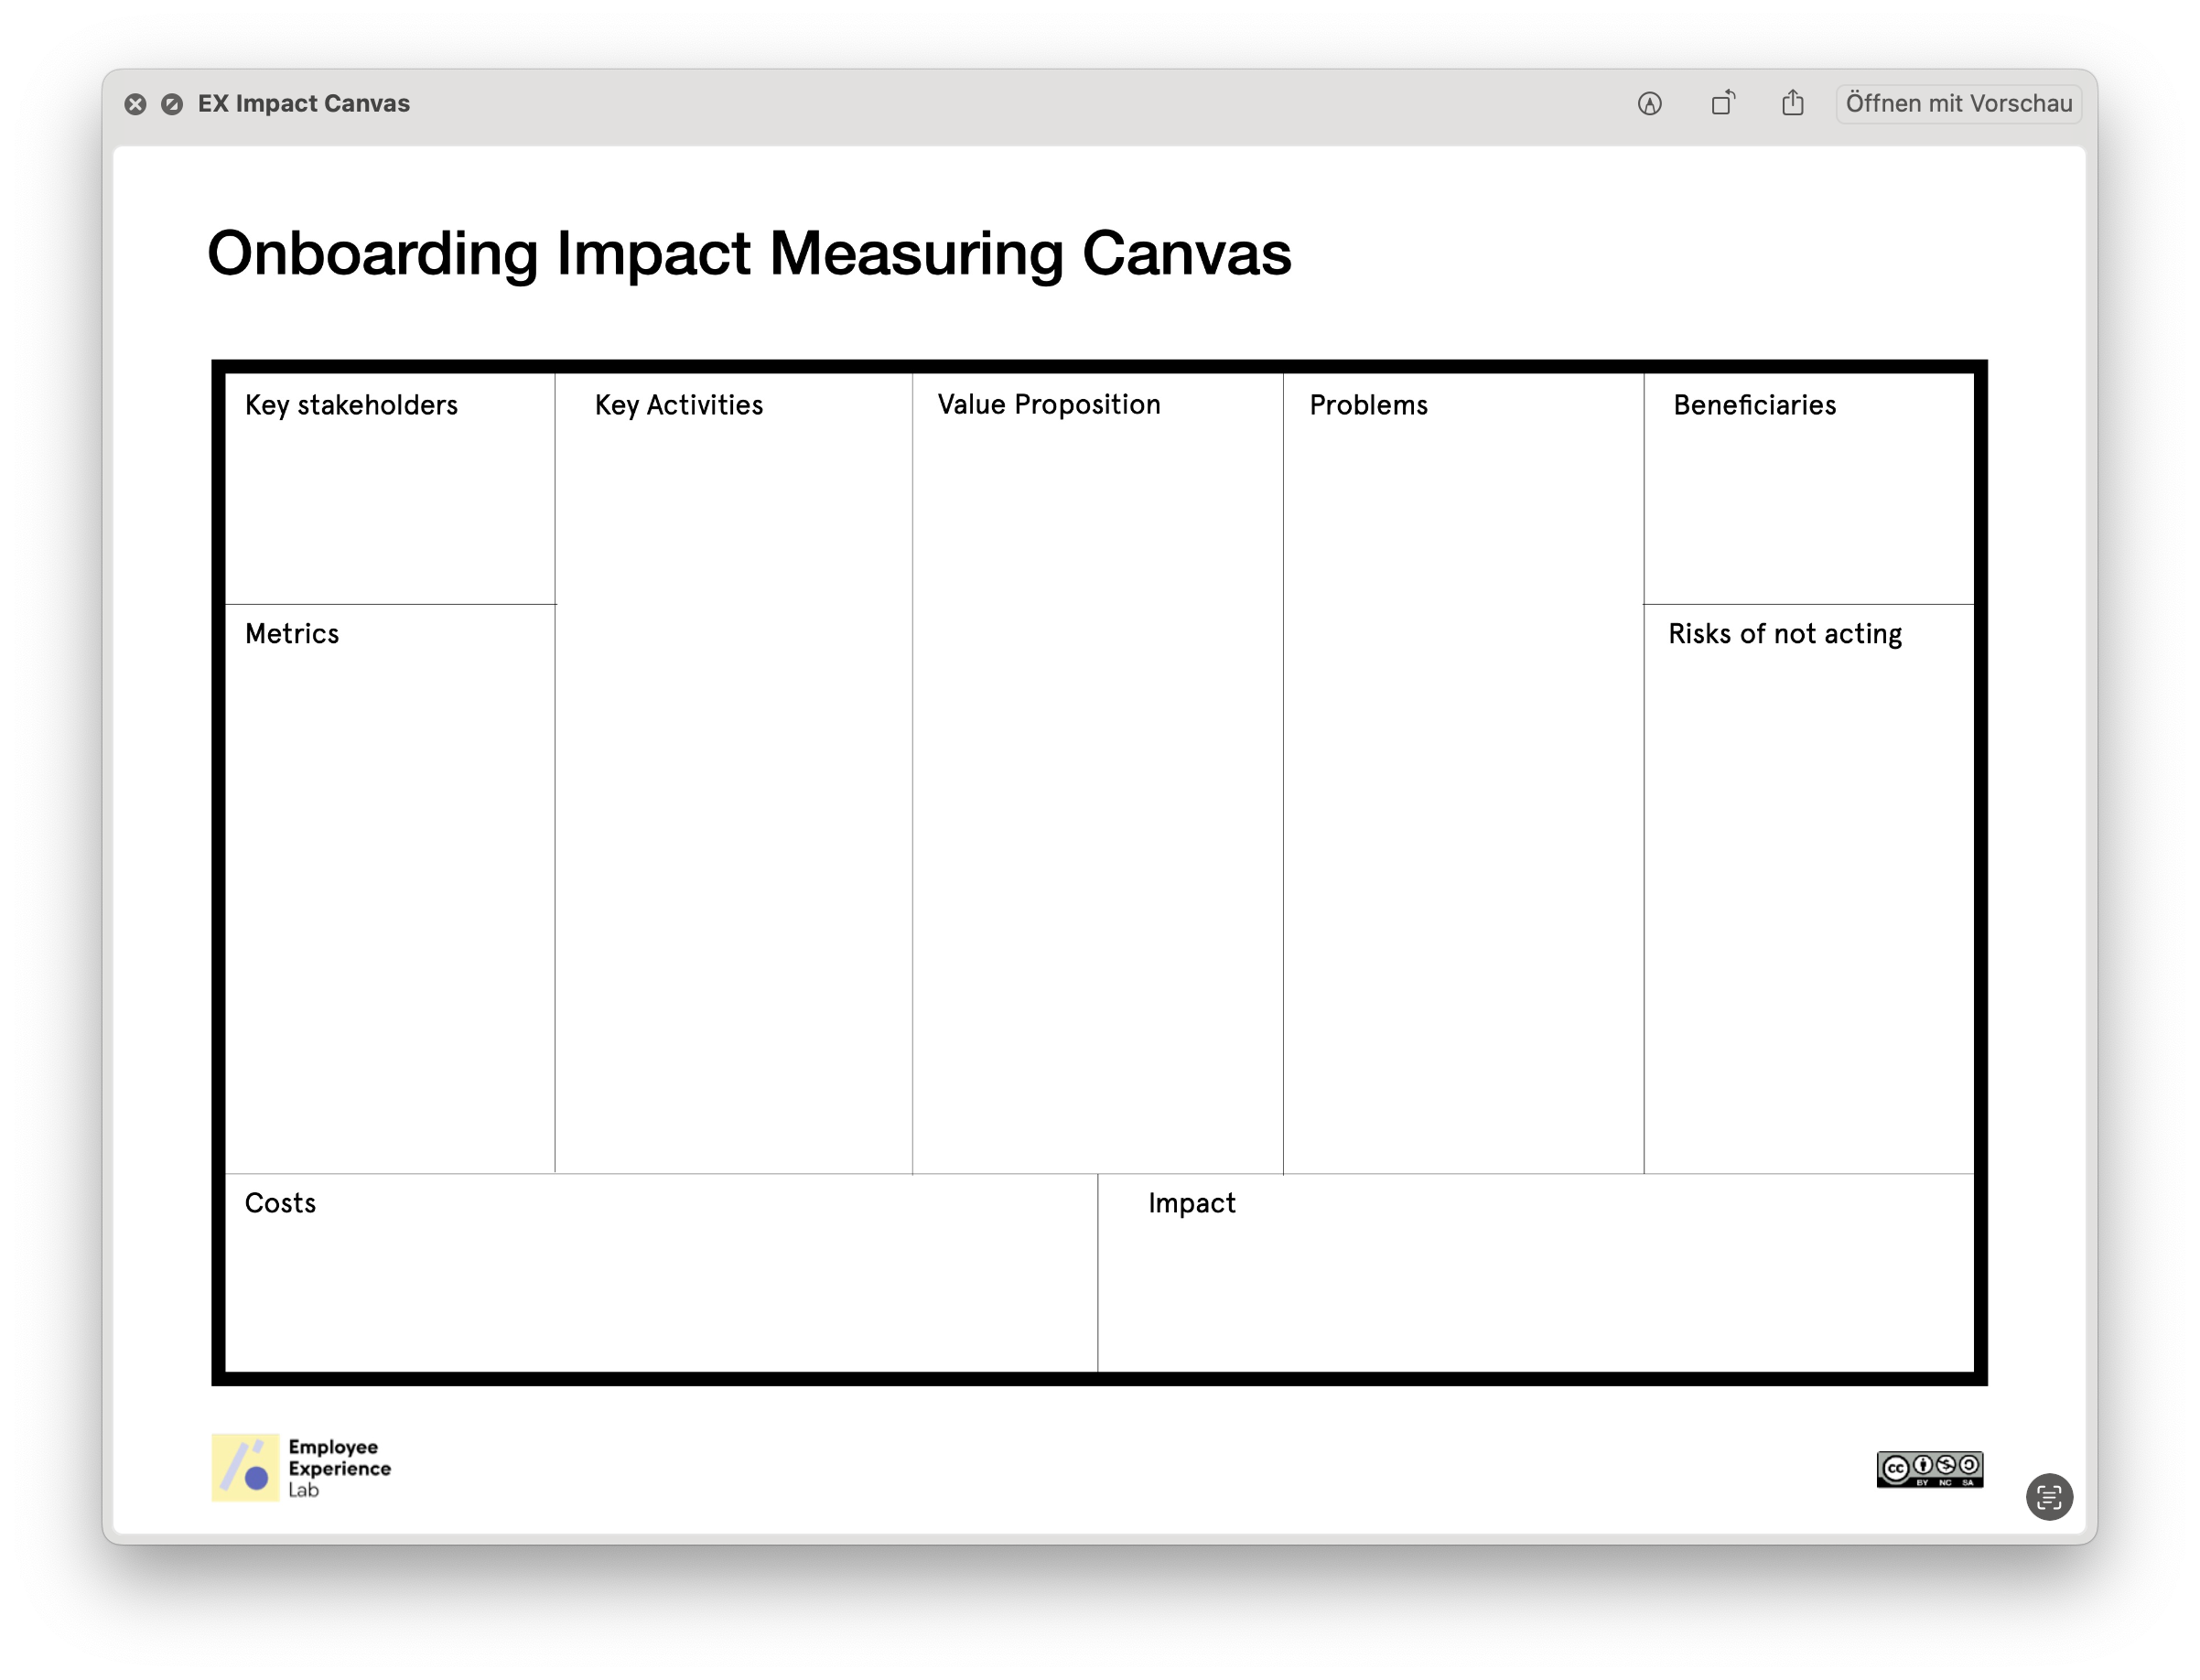 Employee Experience Lab Onboarding Impact Measuring Canvas  